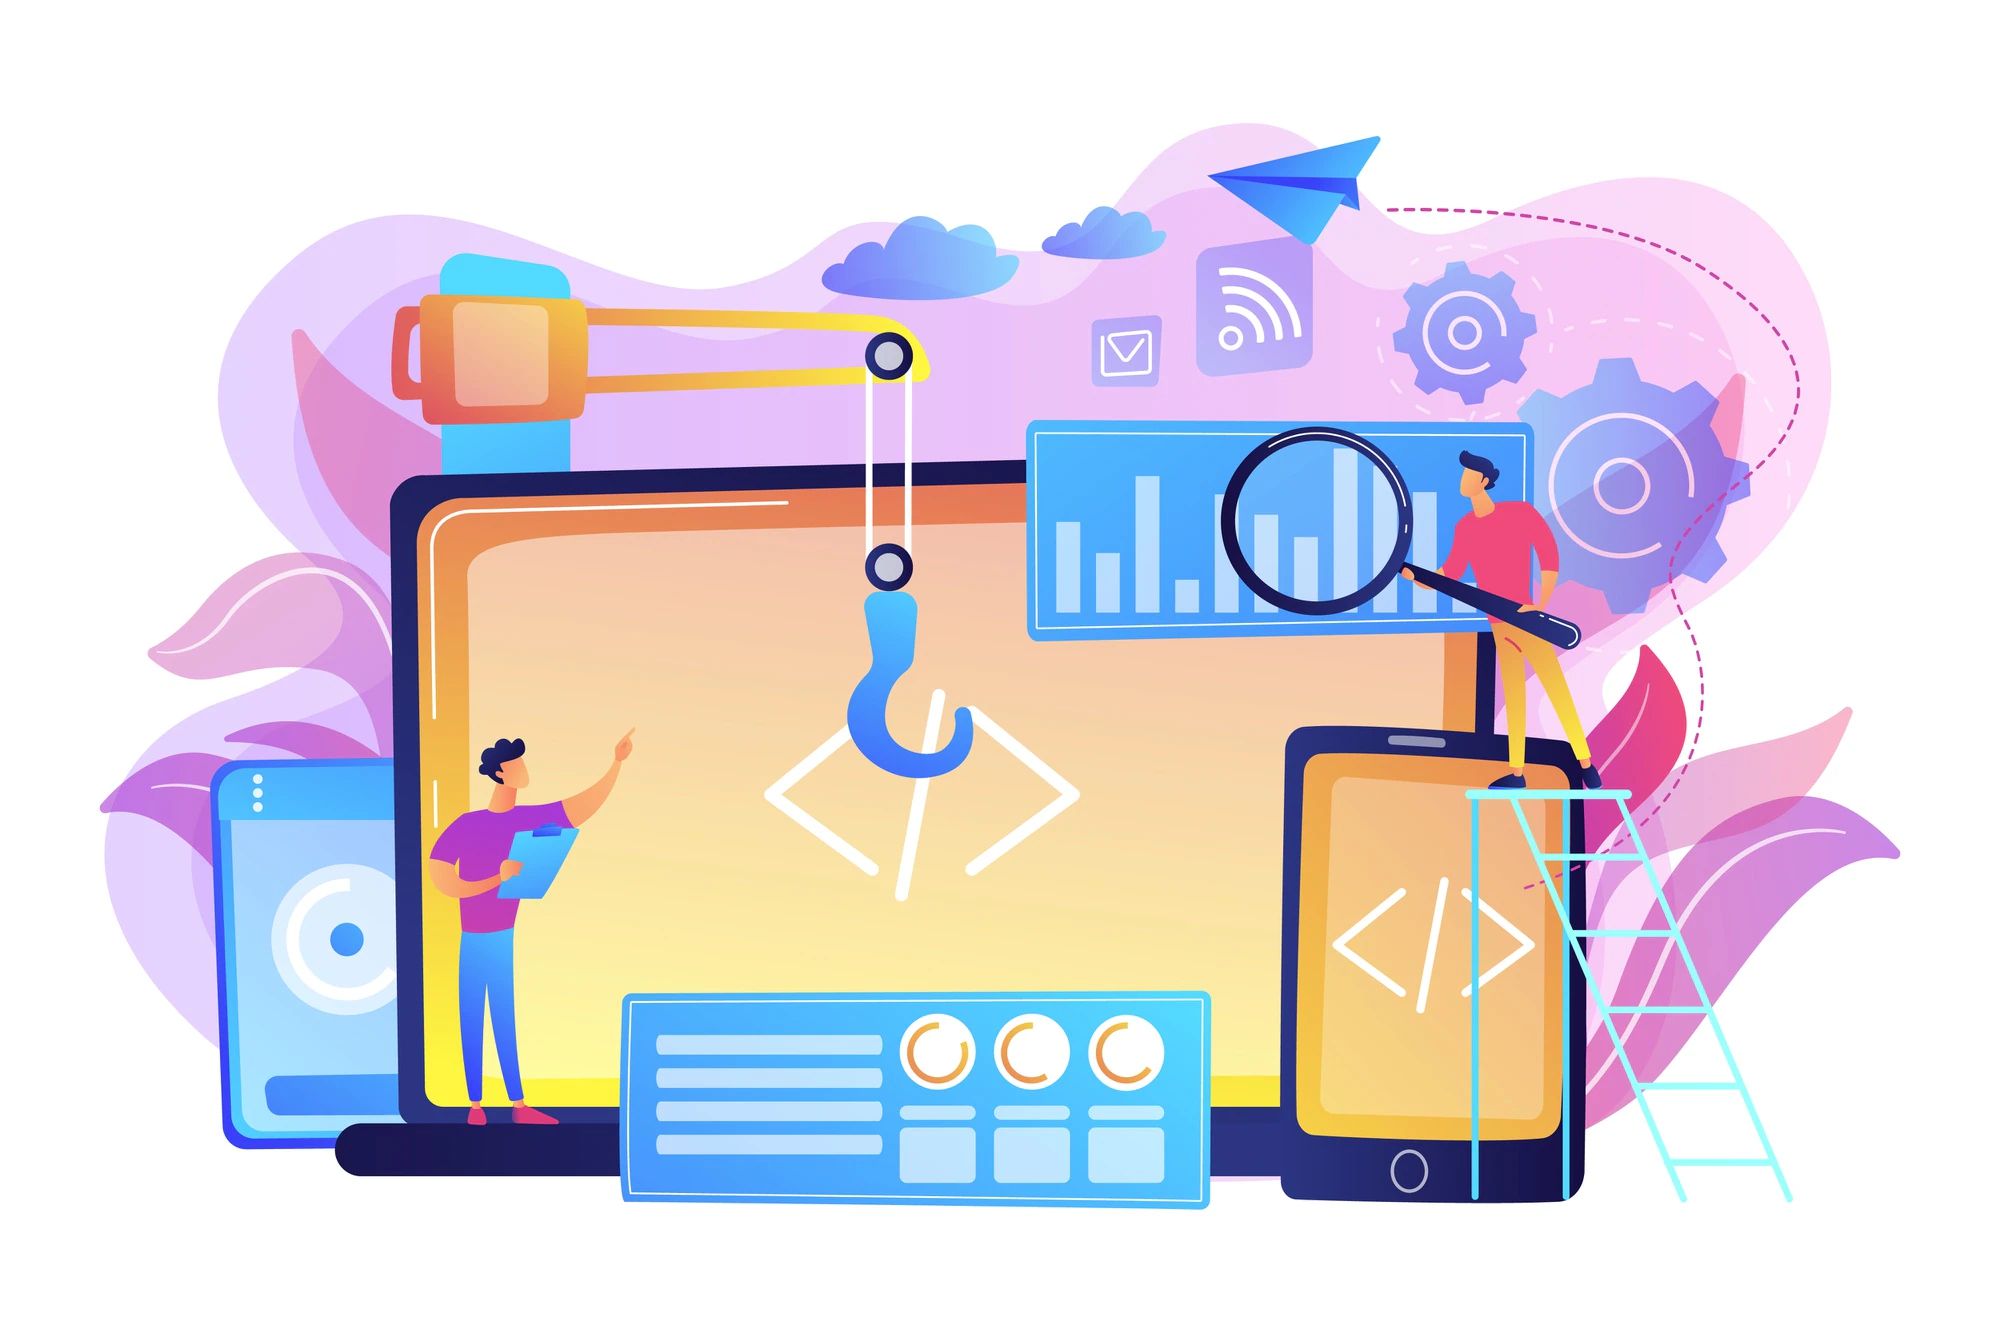 engineer-developer-with-laptop-tablet-code-cross-platform-development-cross-platform-operating-systems-software-environments-concept-bright-vibrant-violet-isolated-illustration_335657-312